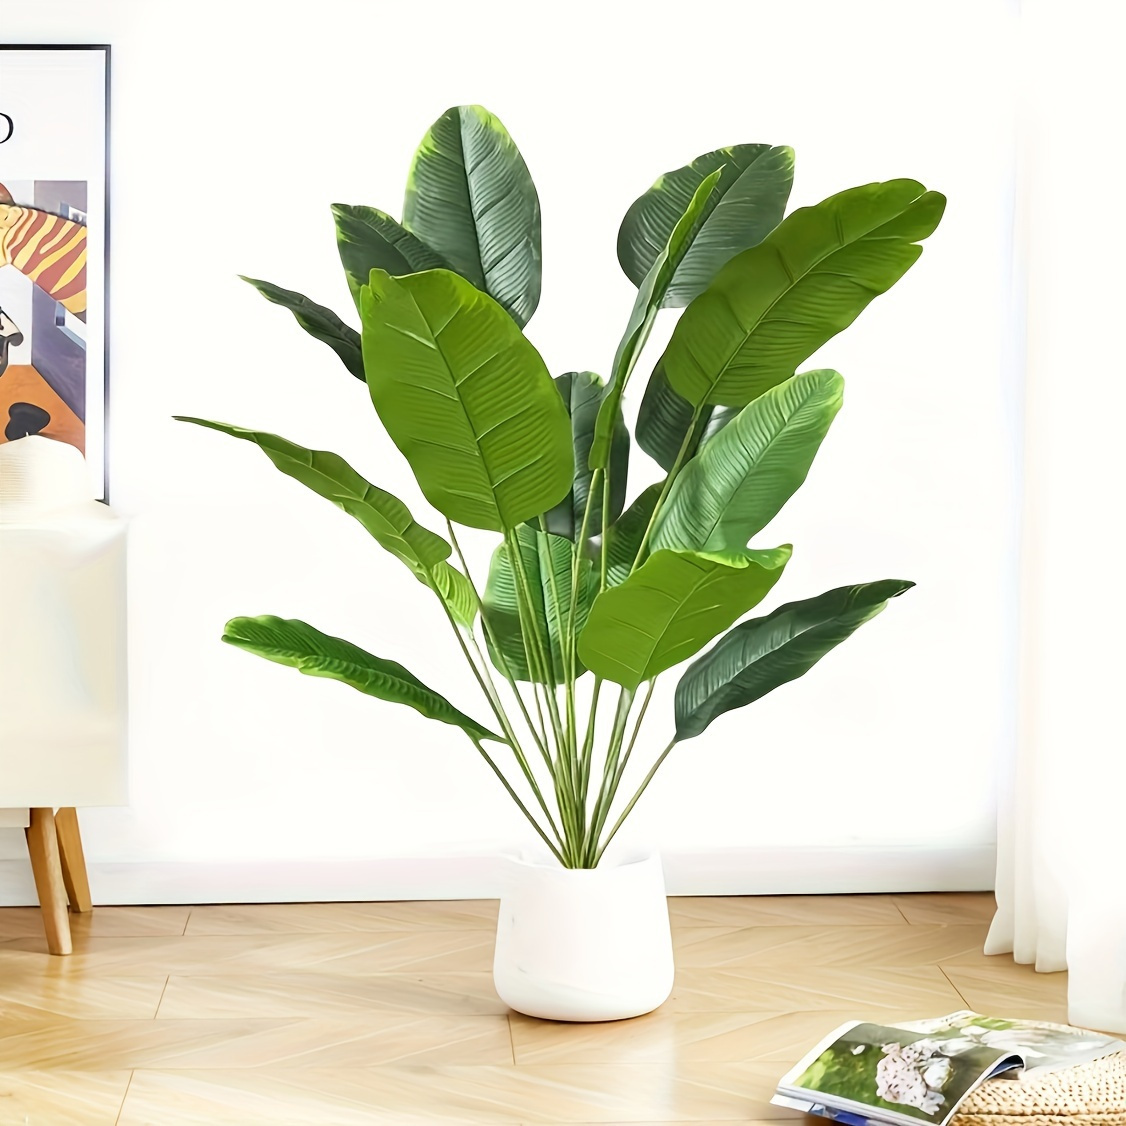 

1pc Plastic Artificial Dieffenbachia Plant For Indoor & Outdoor Decor, Faux Banana Leaf Greenery For Home, Office, Housewarming, Garden Patio Decoration